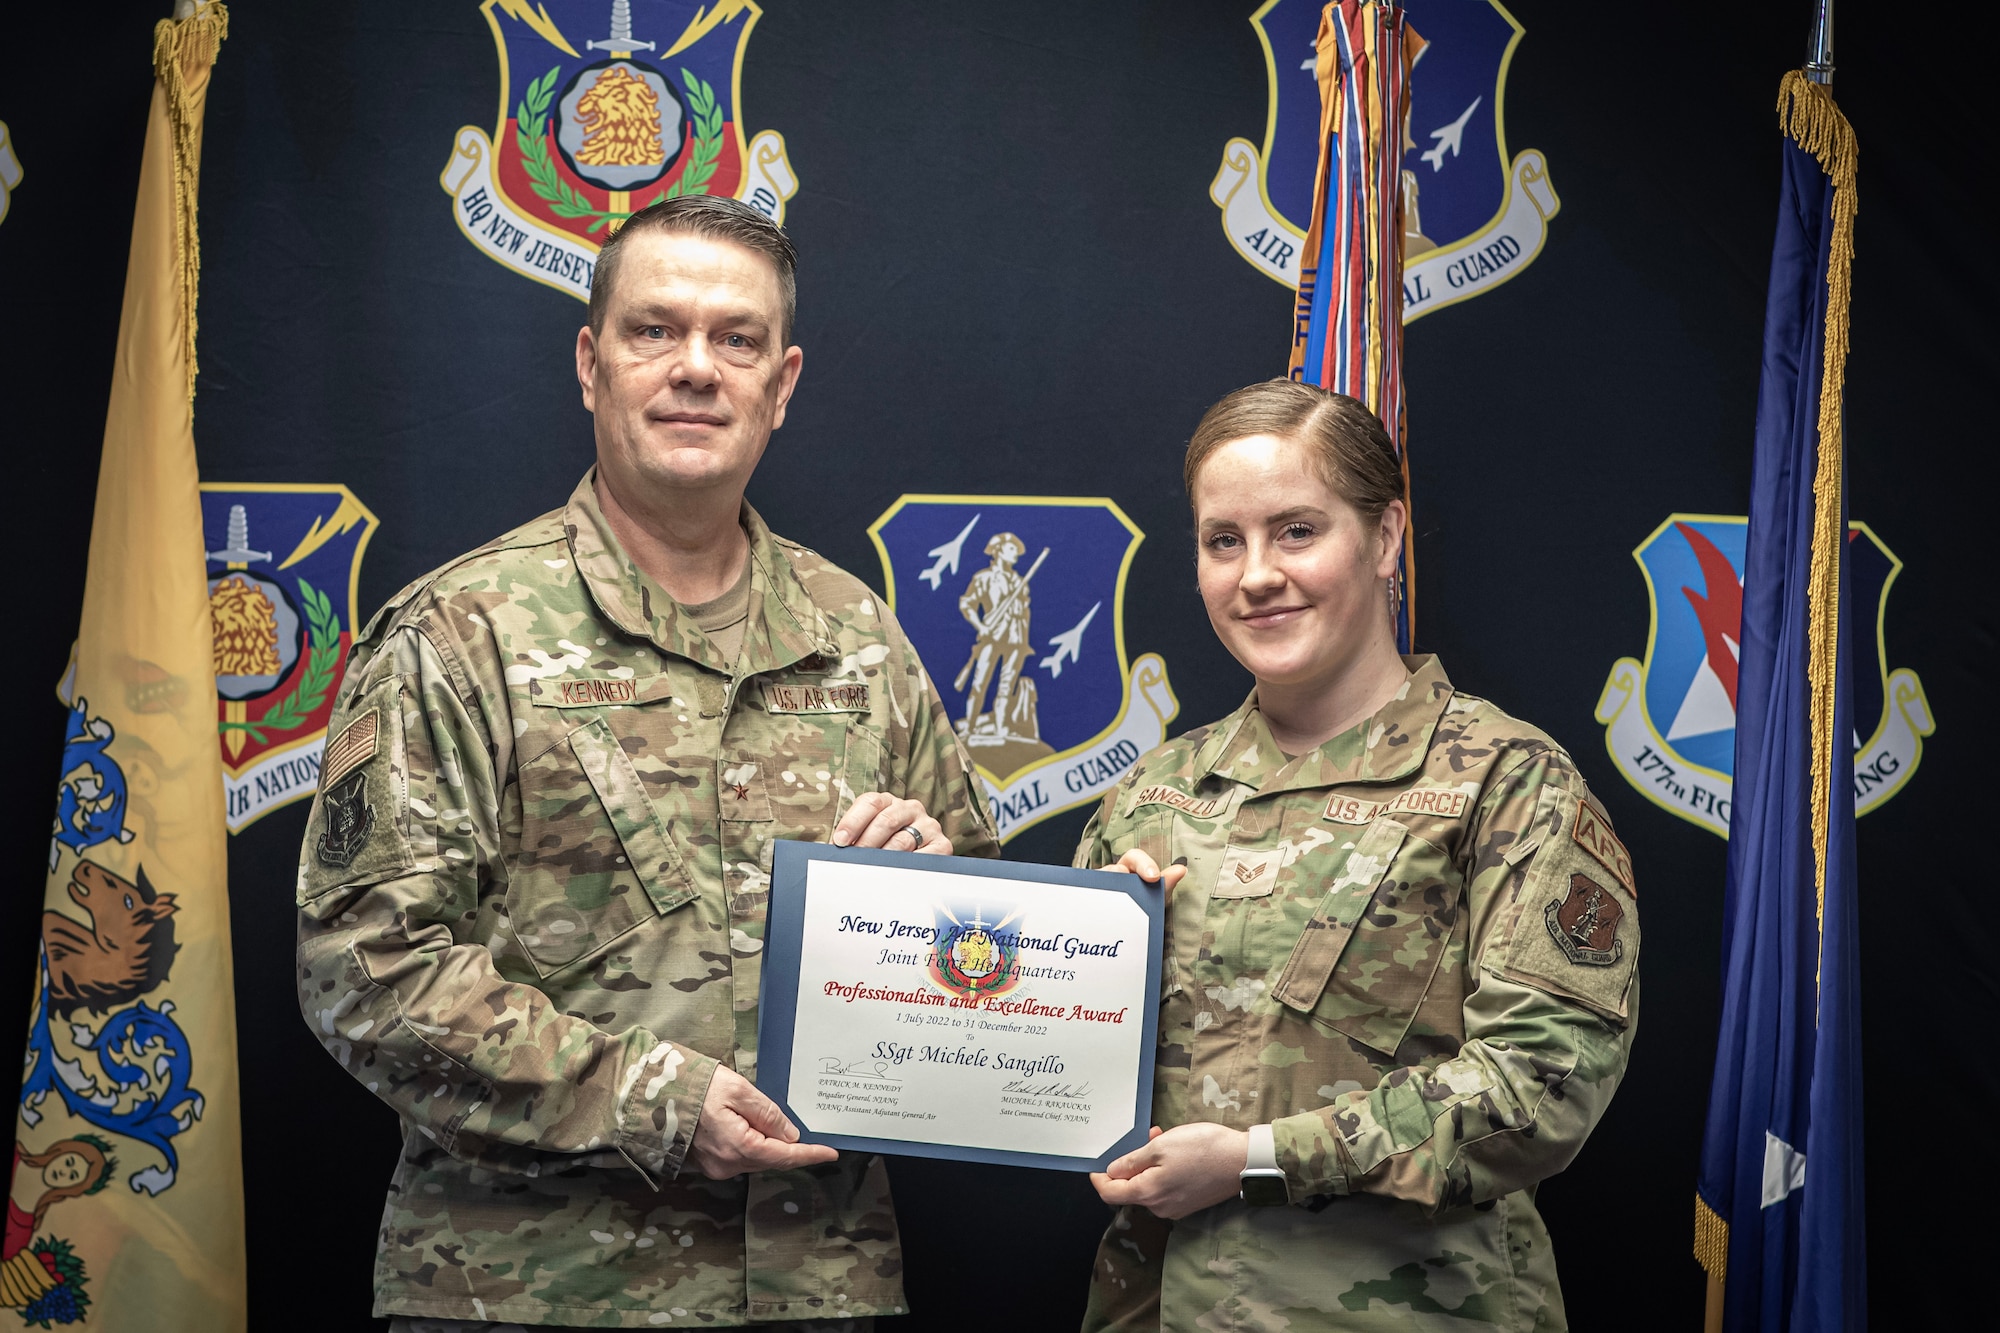 U.S. Air Force Staff Sgt. Michele Sangillo was awarded the New Jersey Air National Guard JFHQ Professionalism and Excellence Award by Brig. Gen. Patrick Kennedy, Commander of the New Jersey Air National Guard, left, on Joint Base McGuire-Dix-Lakehurst, N.J., March 4, 2023.